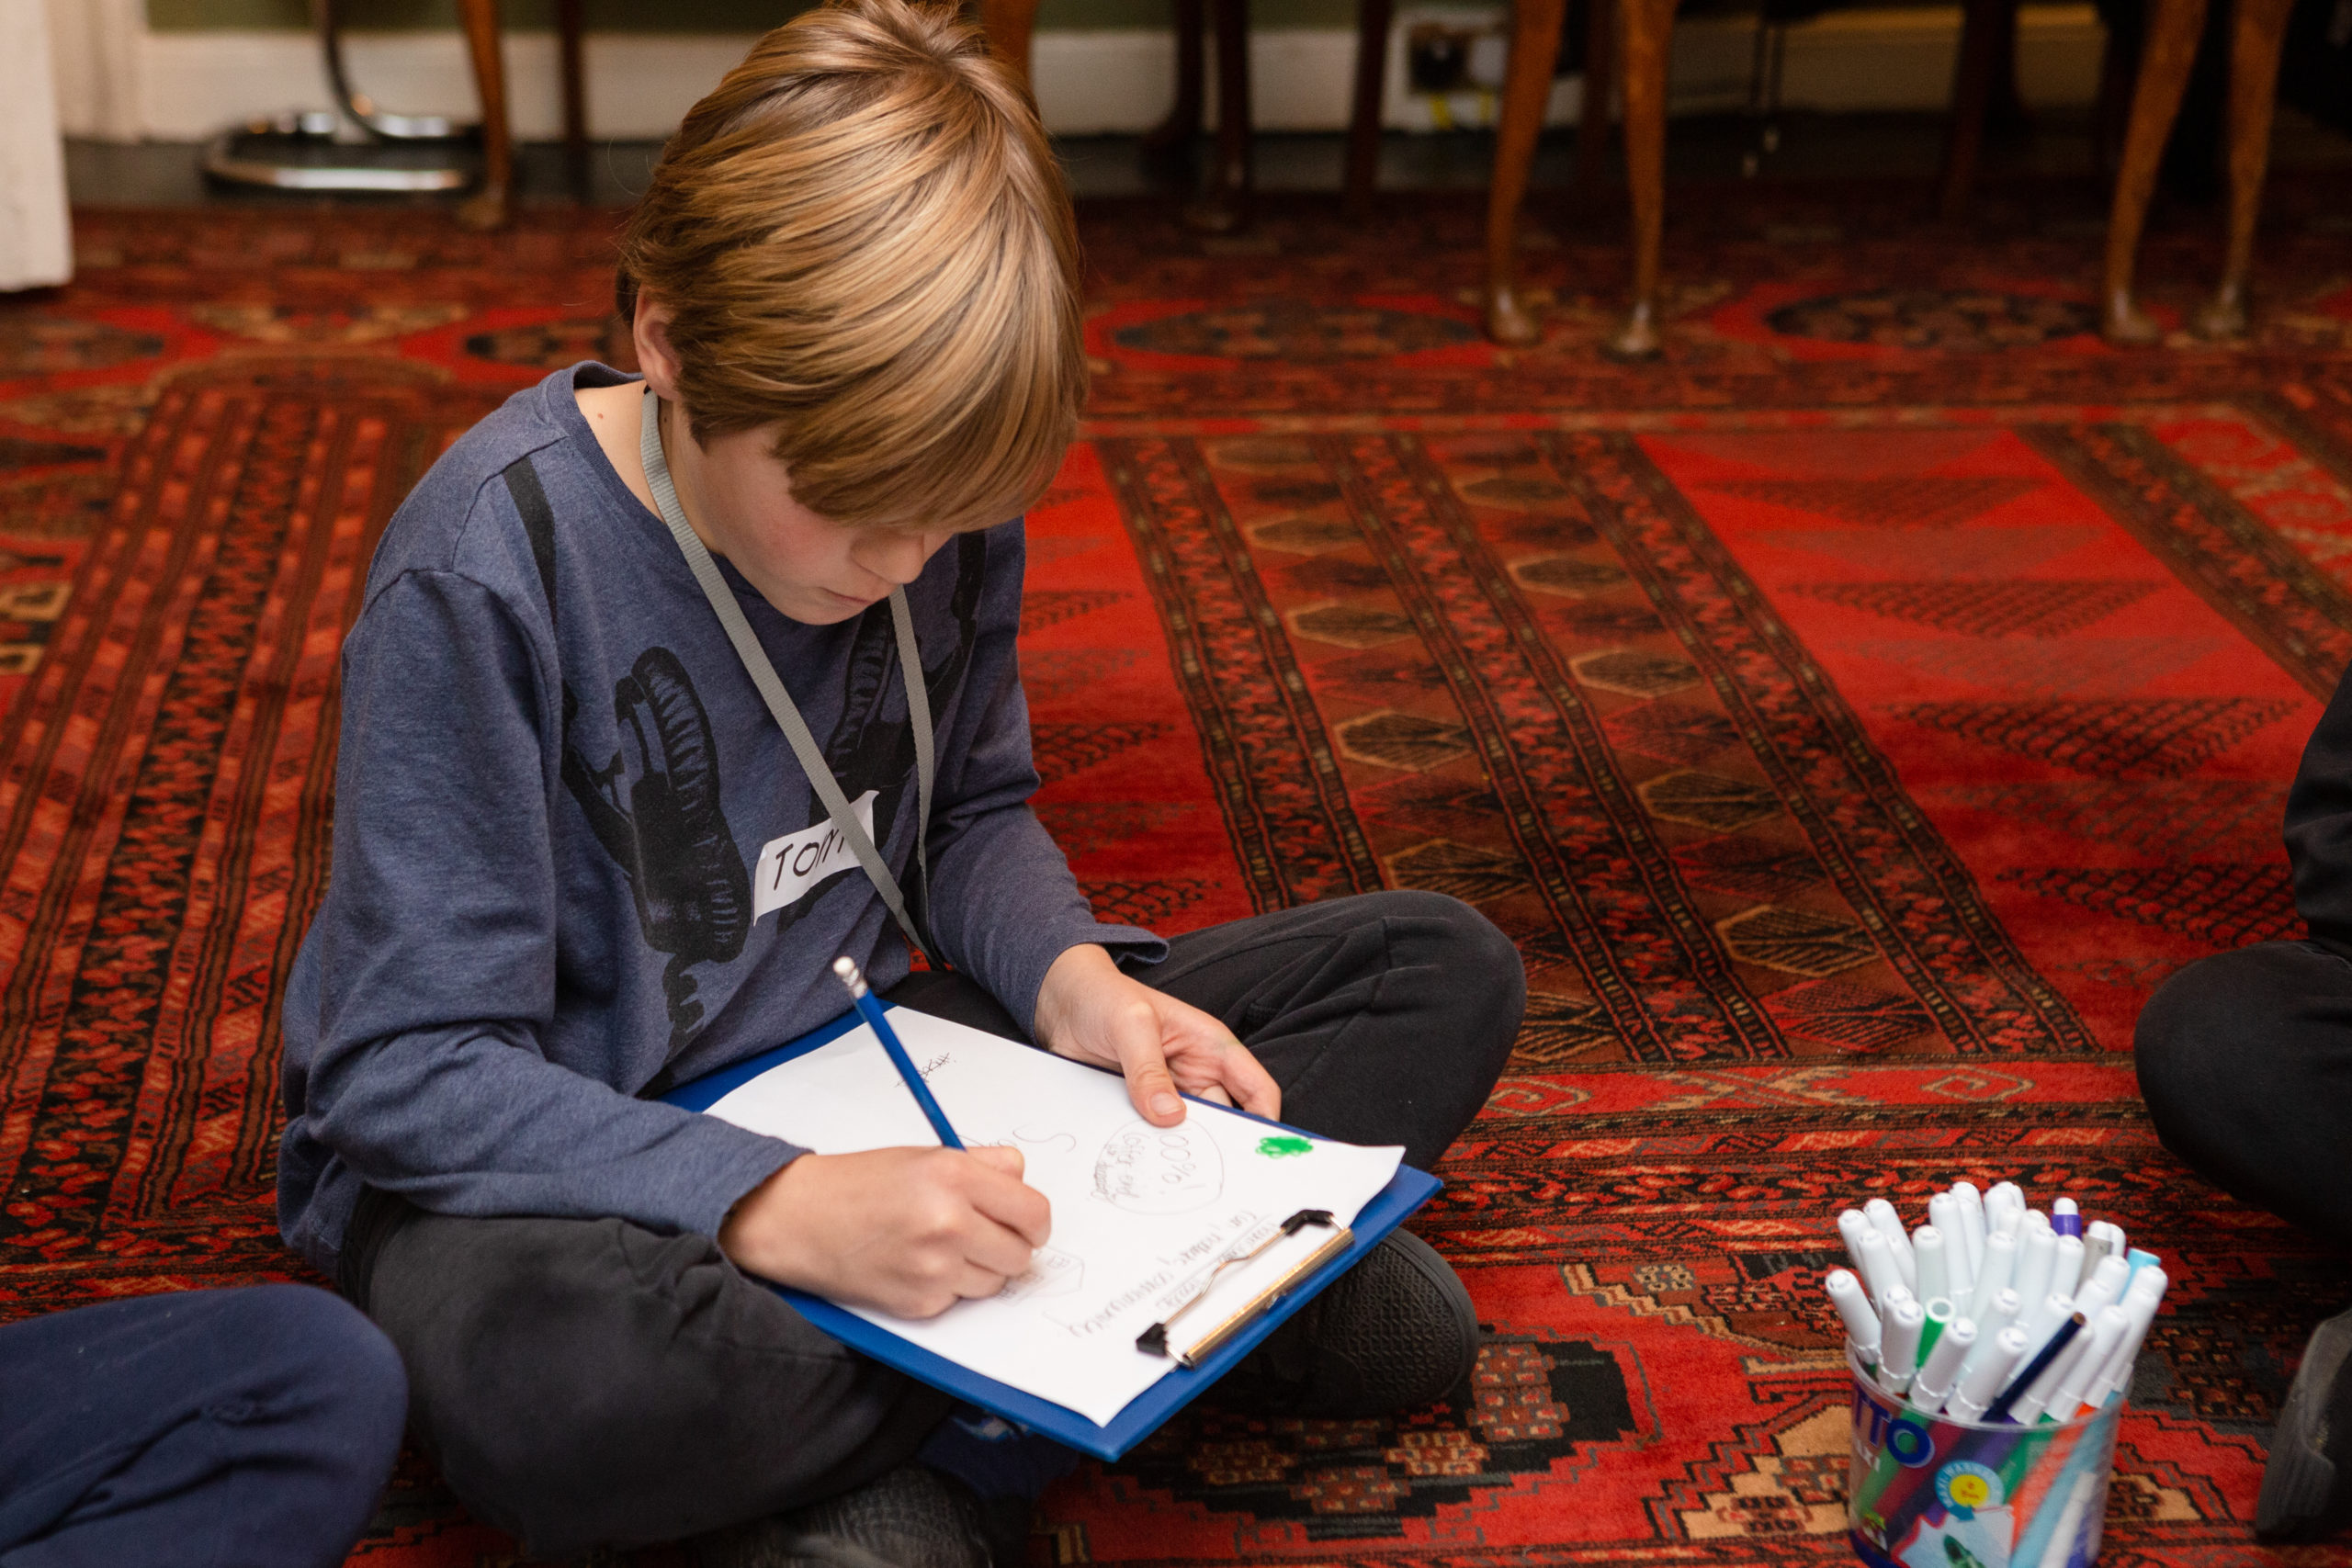 A young boy draws on a clipboard on a carpeted floor.